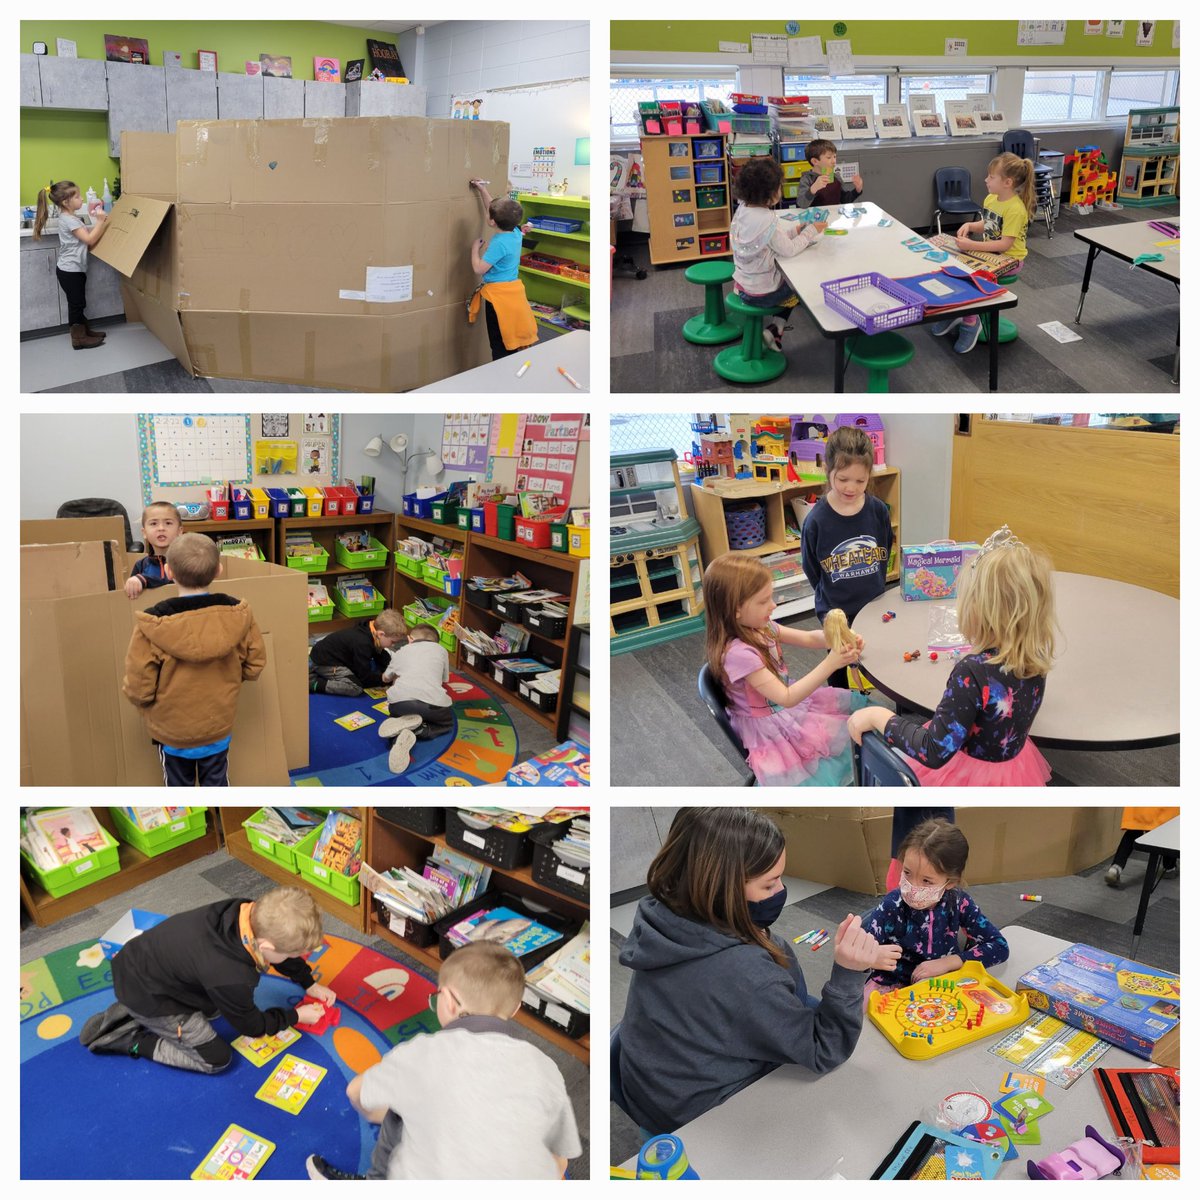 'Play is the highest form of research.' Today we had time to be creative, problem solve, and practice skills. It was a great day! #wcsflight #GlobalSchoolPlayDay